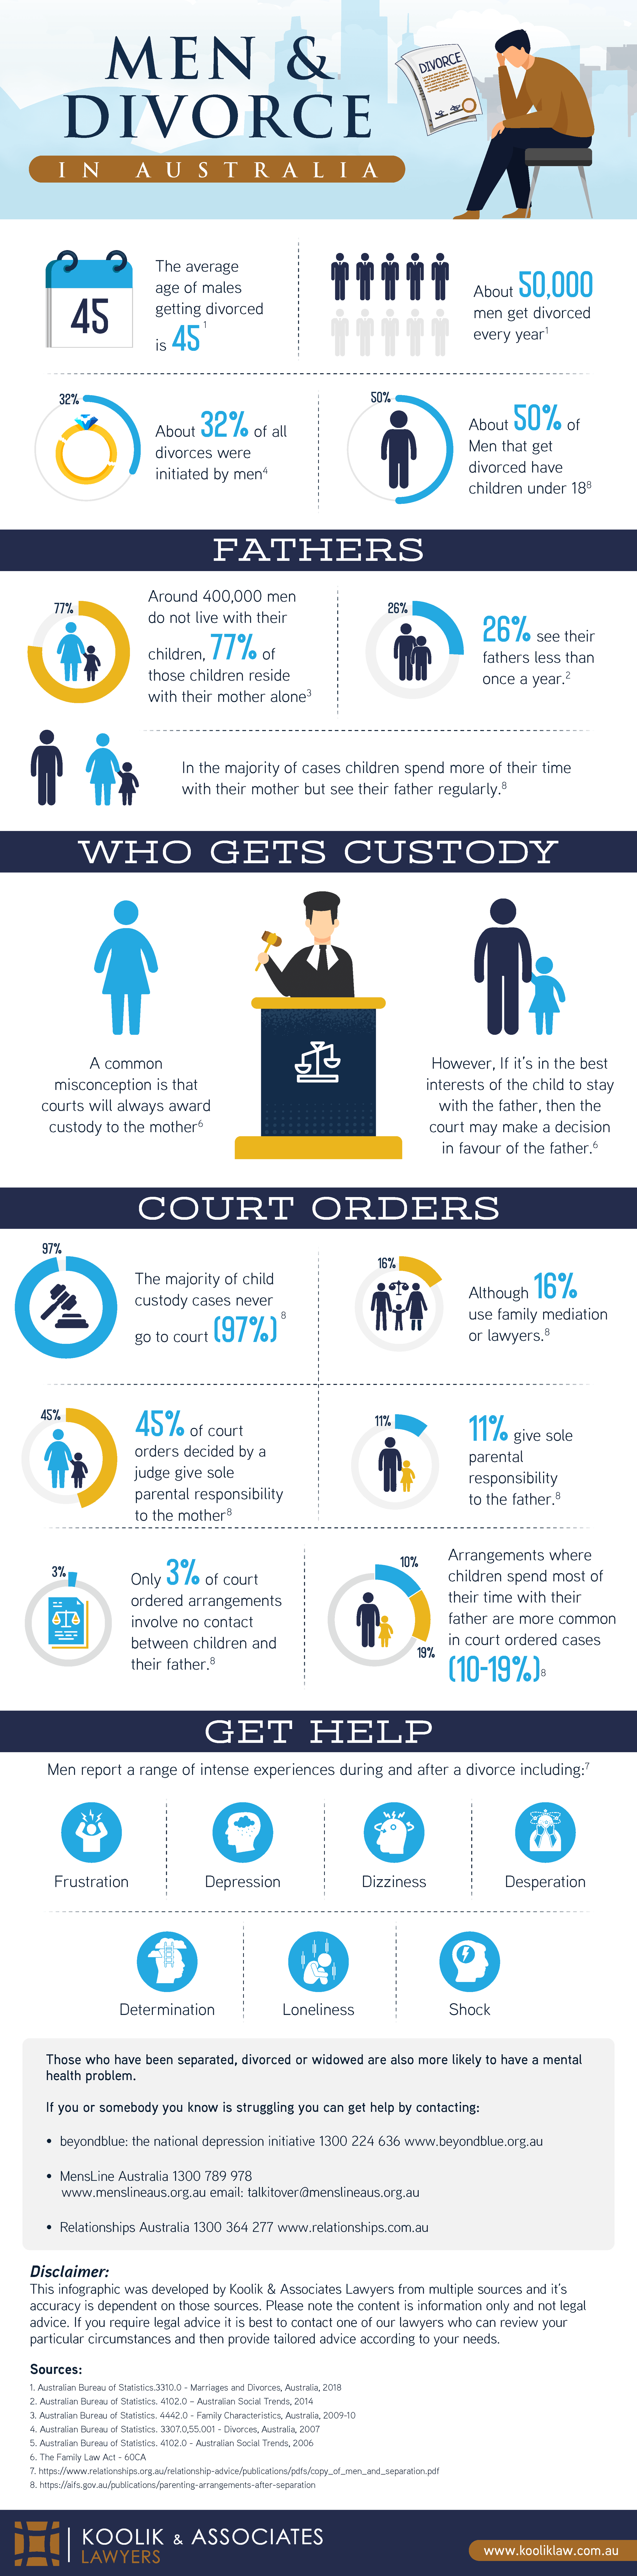 An infographic about divorce and men in Australia